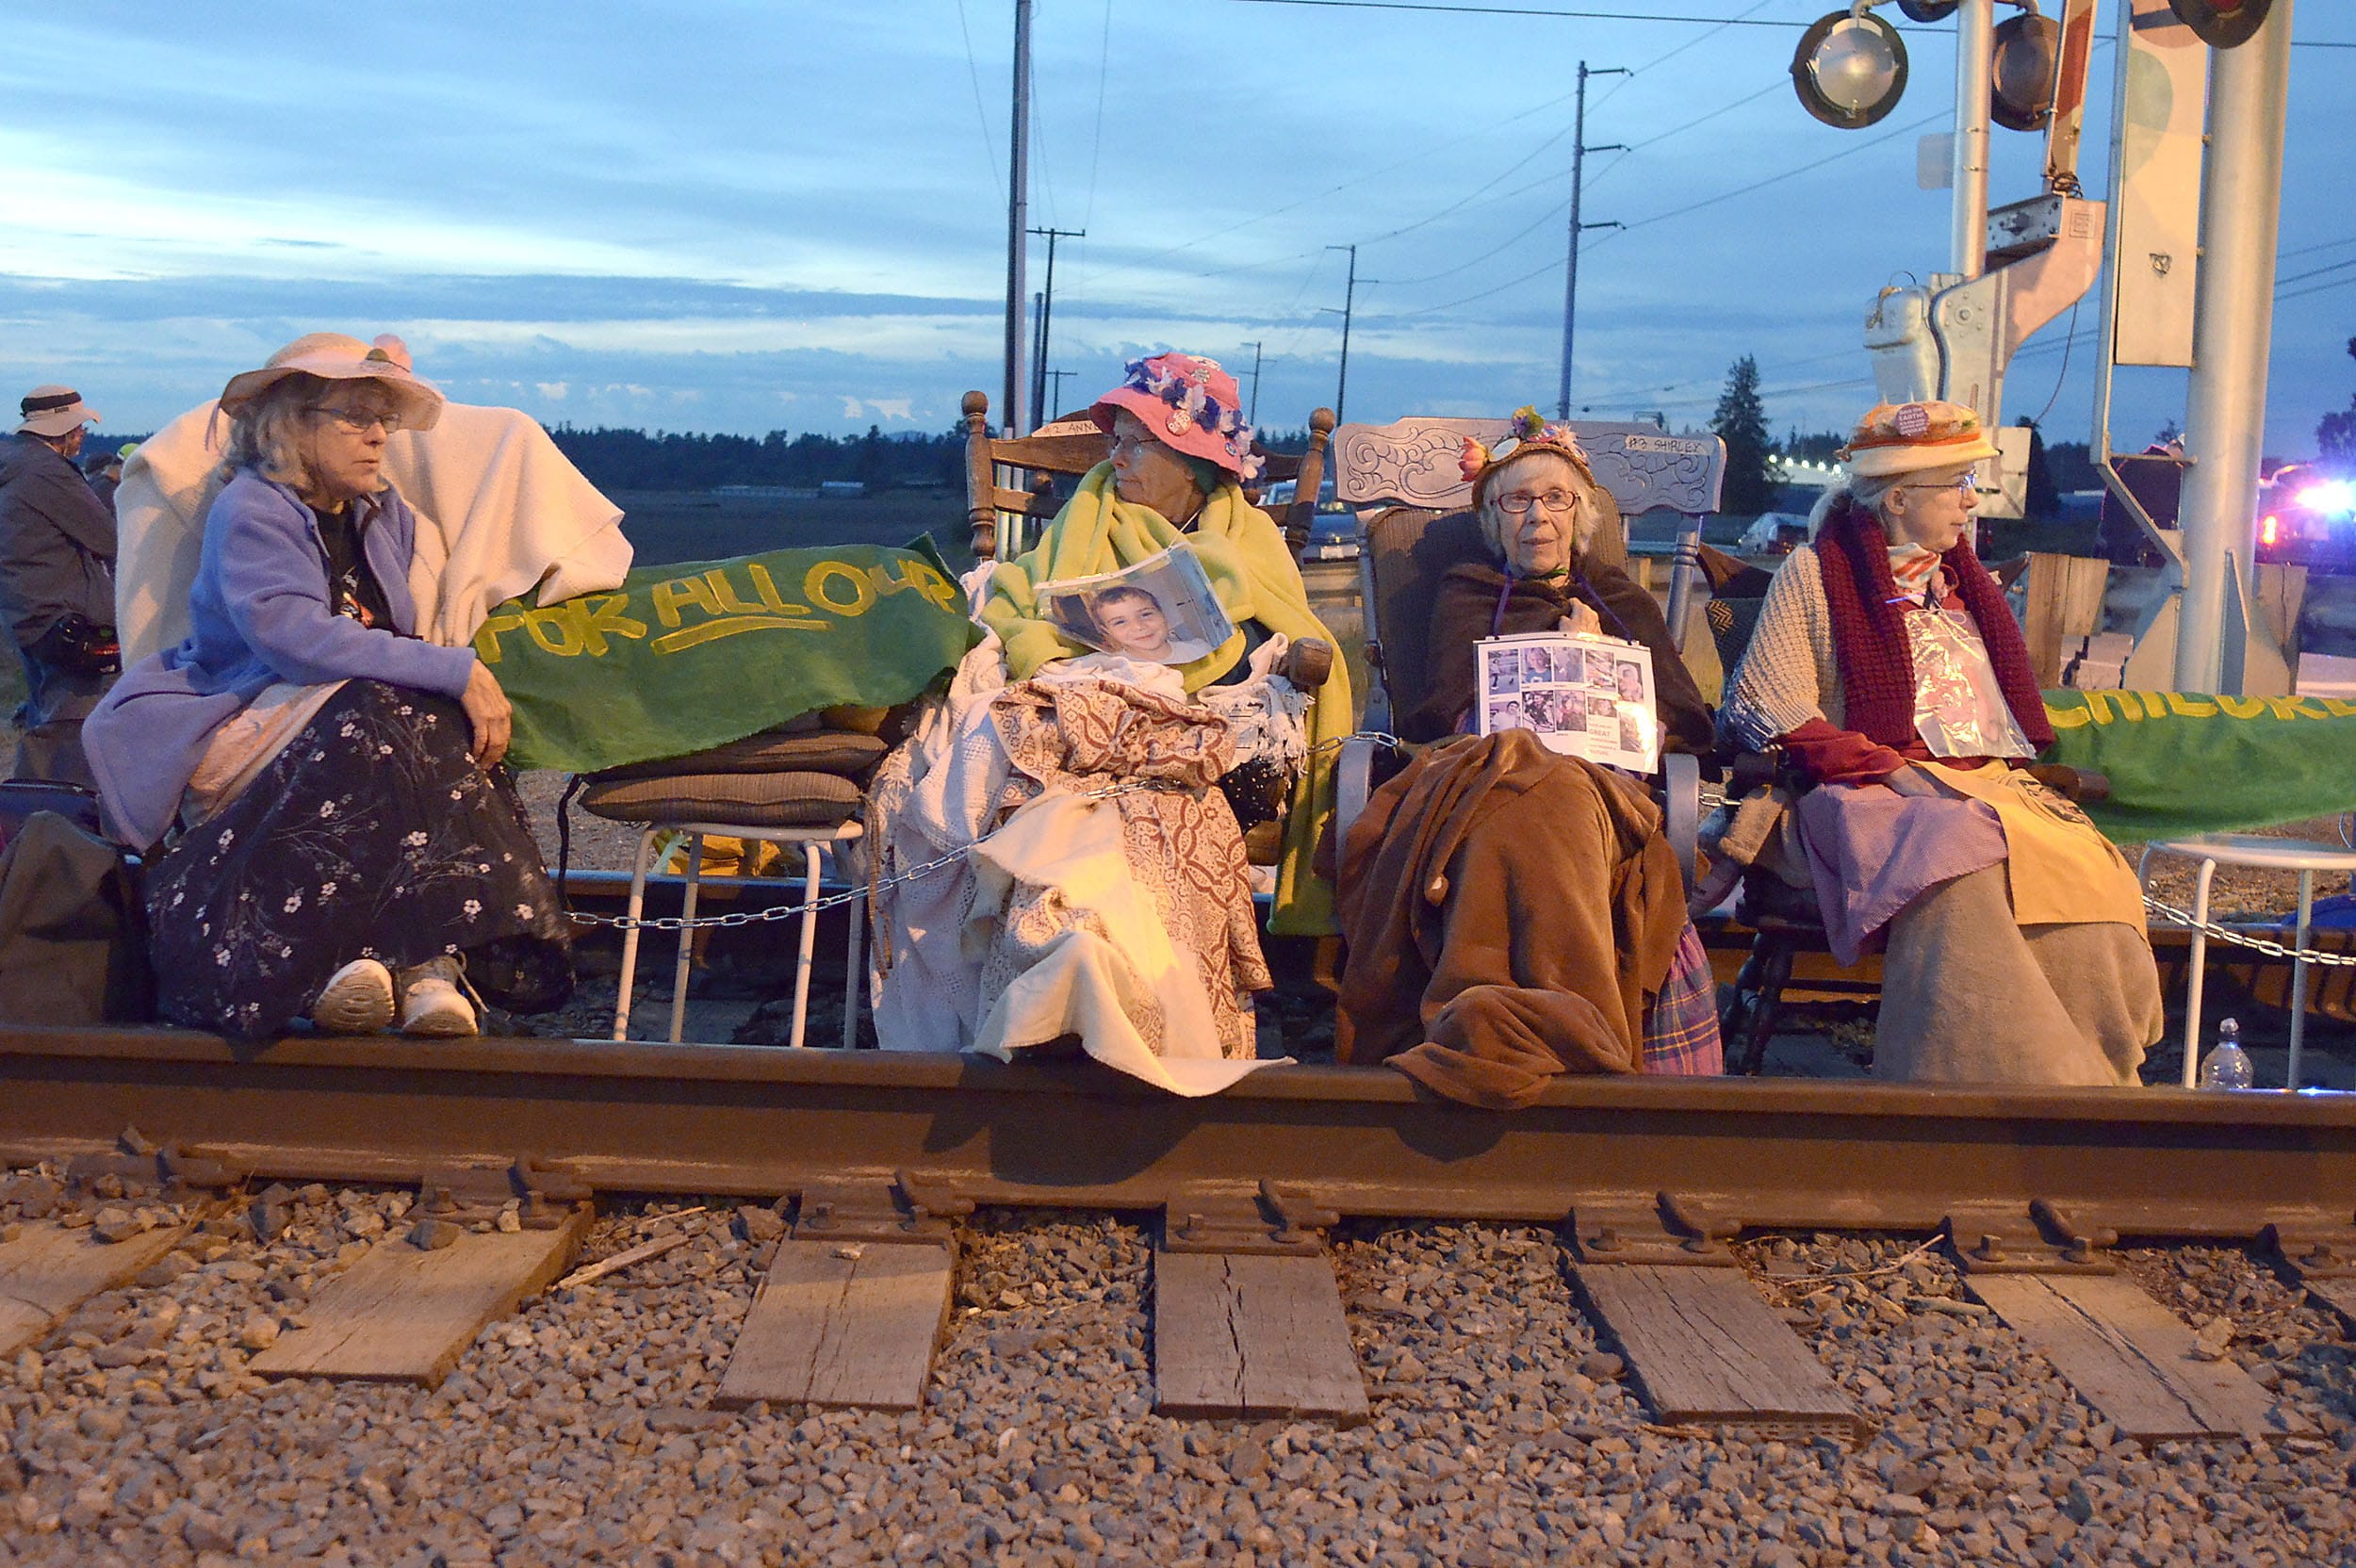 Members of the Seattle Raging Grannies sit in their rocking chairs chained together on the Burlington-Northern Railroad tracks at Farm to Market Road in Skagit County on Friday evening, May 13, 2016, in Burlington, Wash.  From left are Deejay Sherman Peterson, Anne Thureson, Shirley Morrison and Rosy Betz-Zall. Hundreds of people in kayaks and on foot are gathering at the site of two oil refineries in Washington state to call for action on climate change and a fair transition away from fossil fuels.